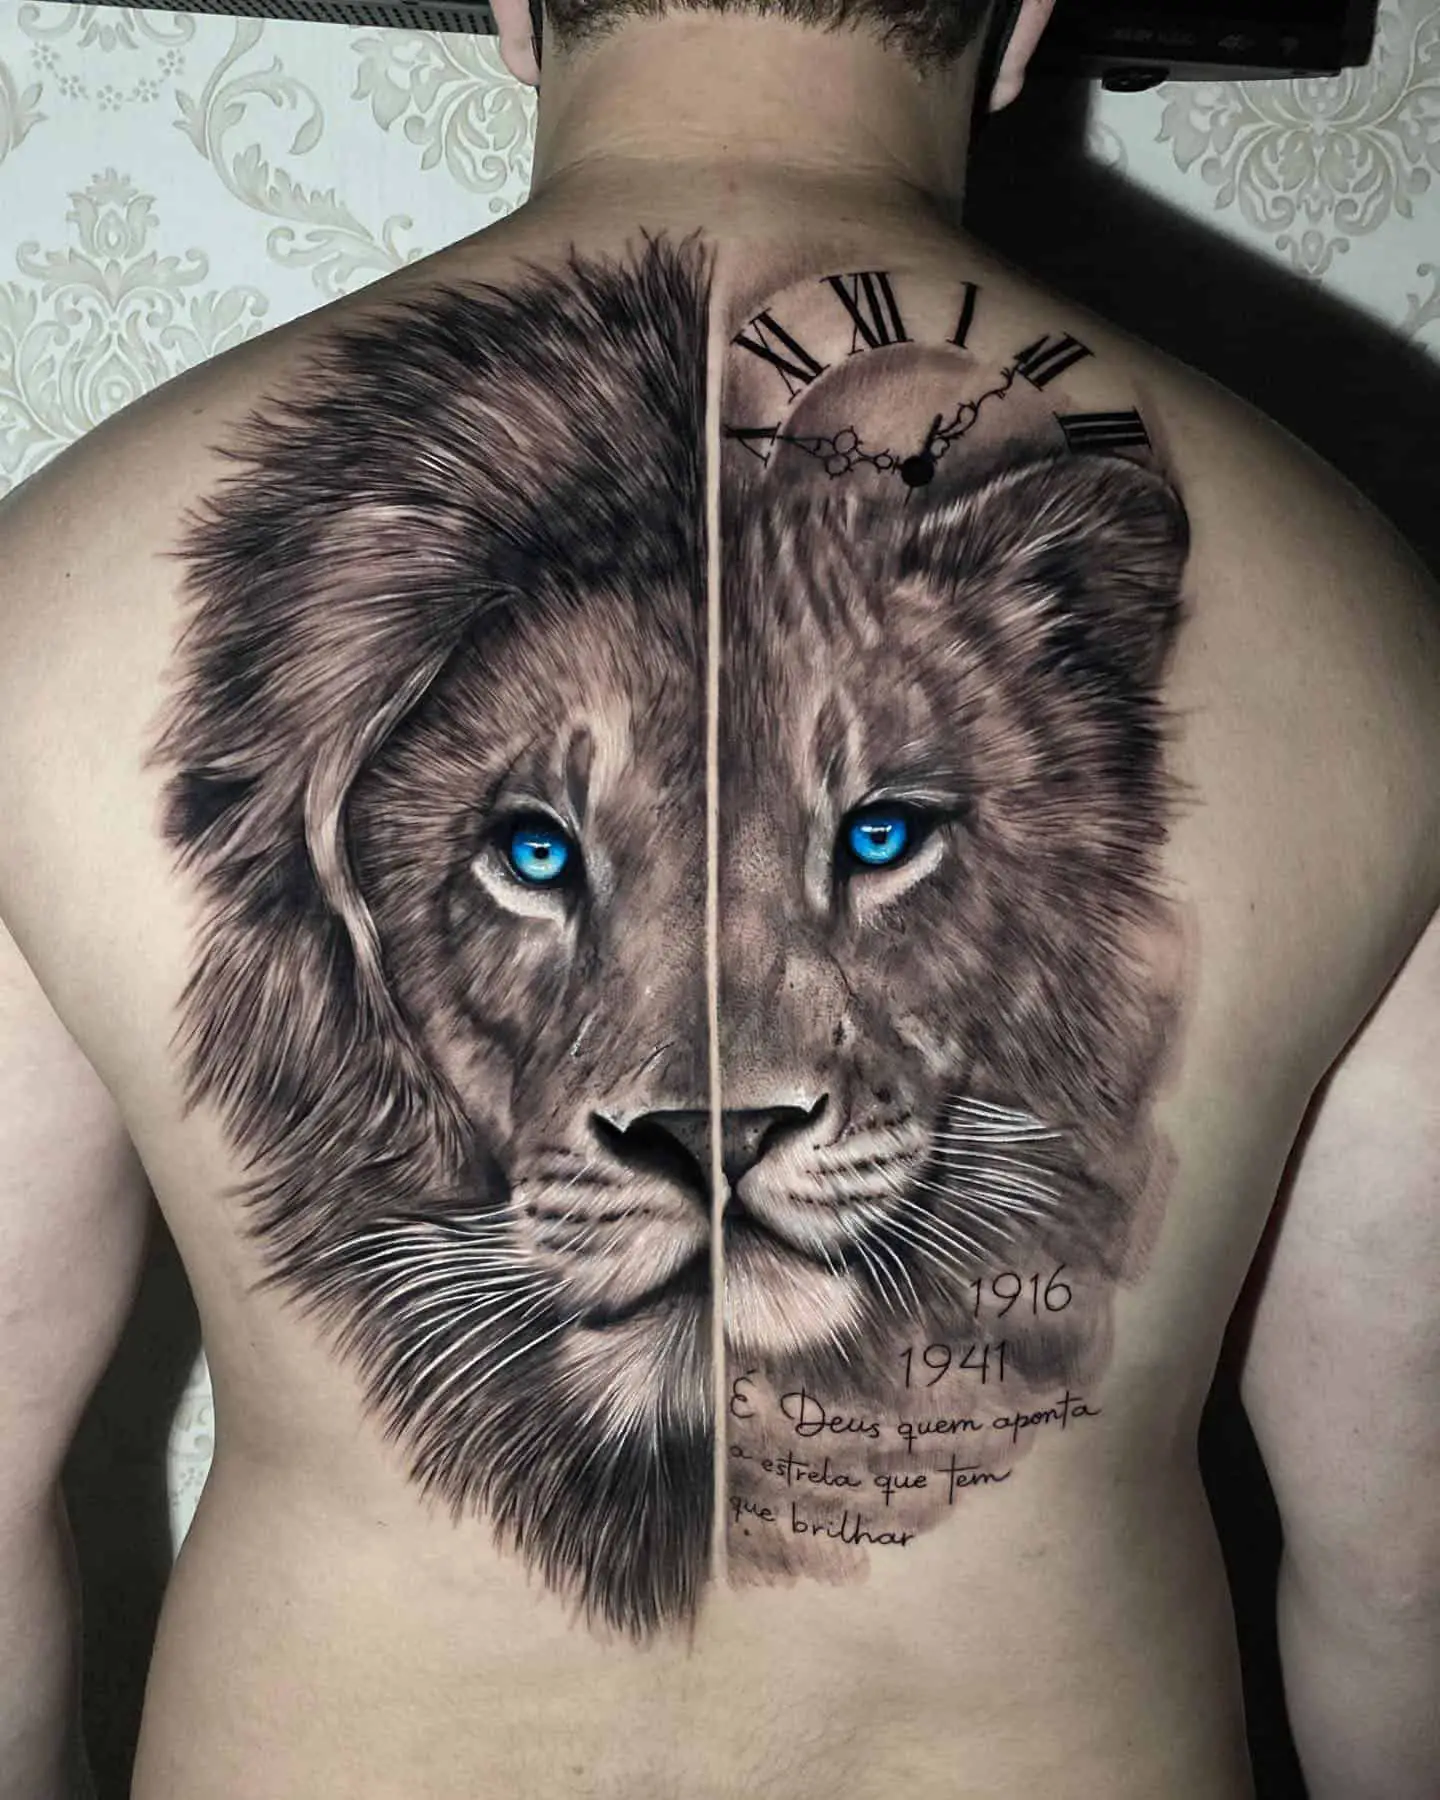 Lion Back Tattoos - Photos of Works By Pro Tattoo Artists at theYou.com